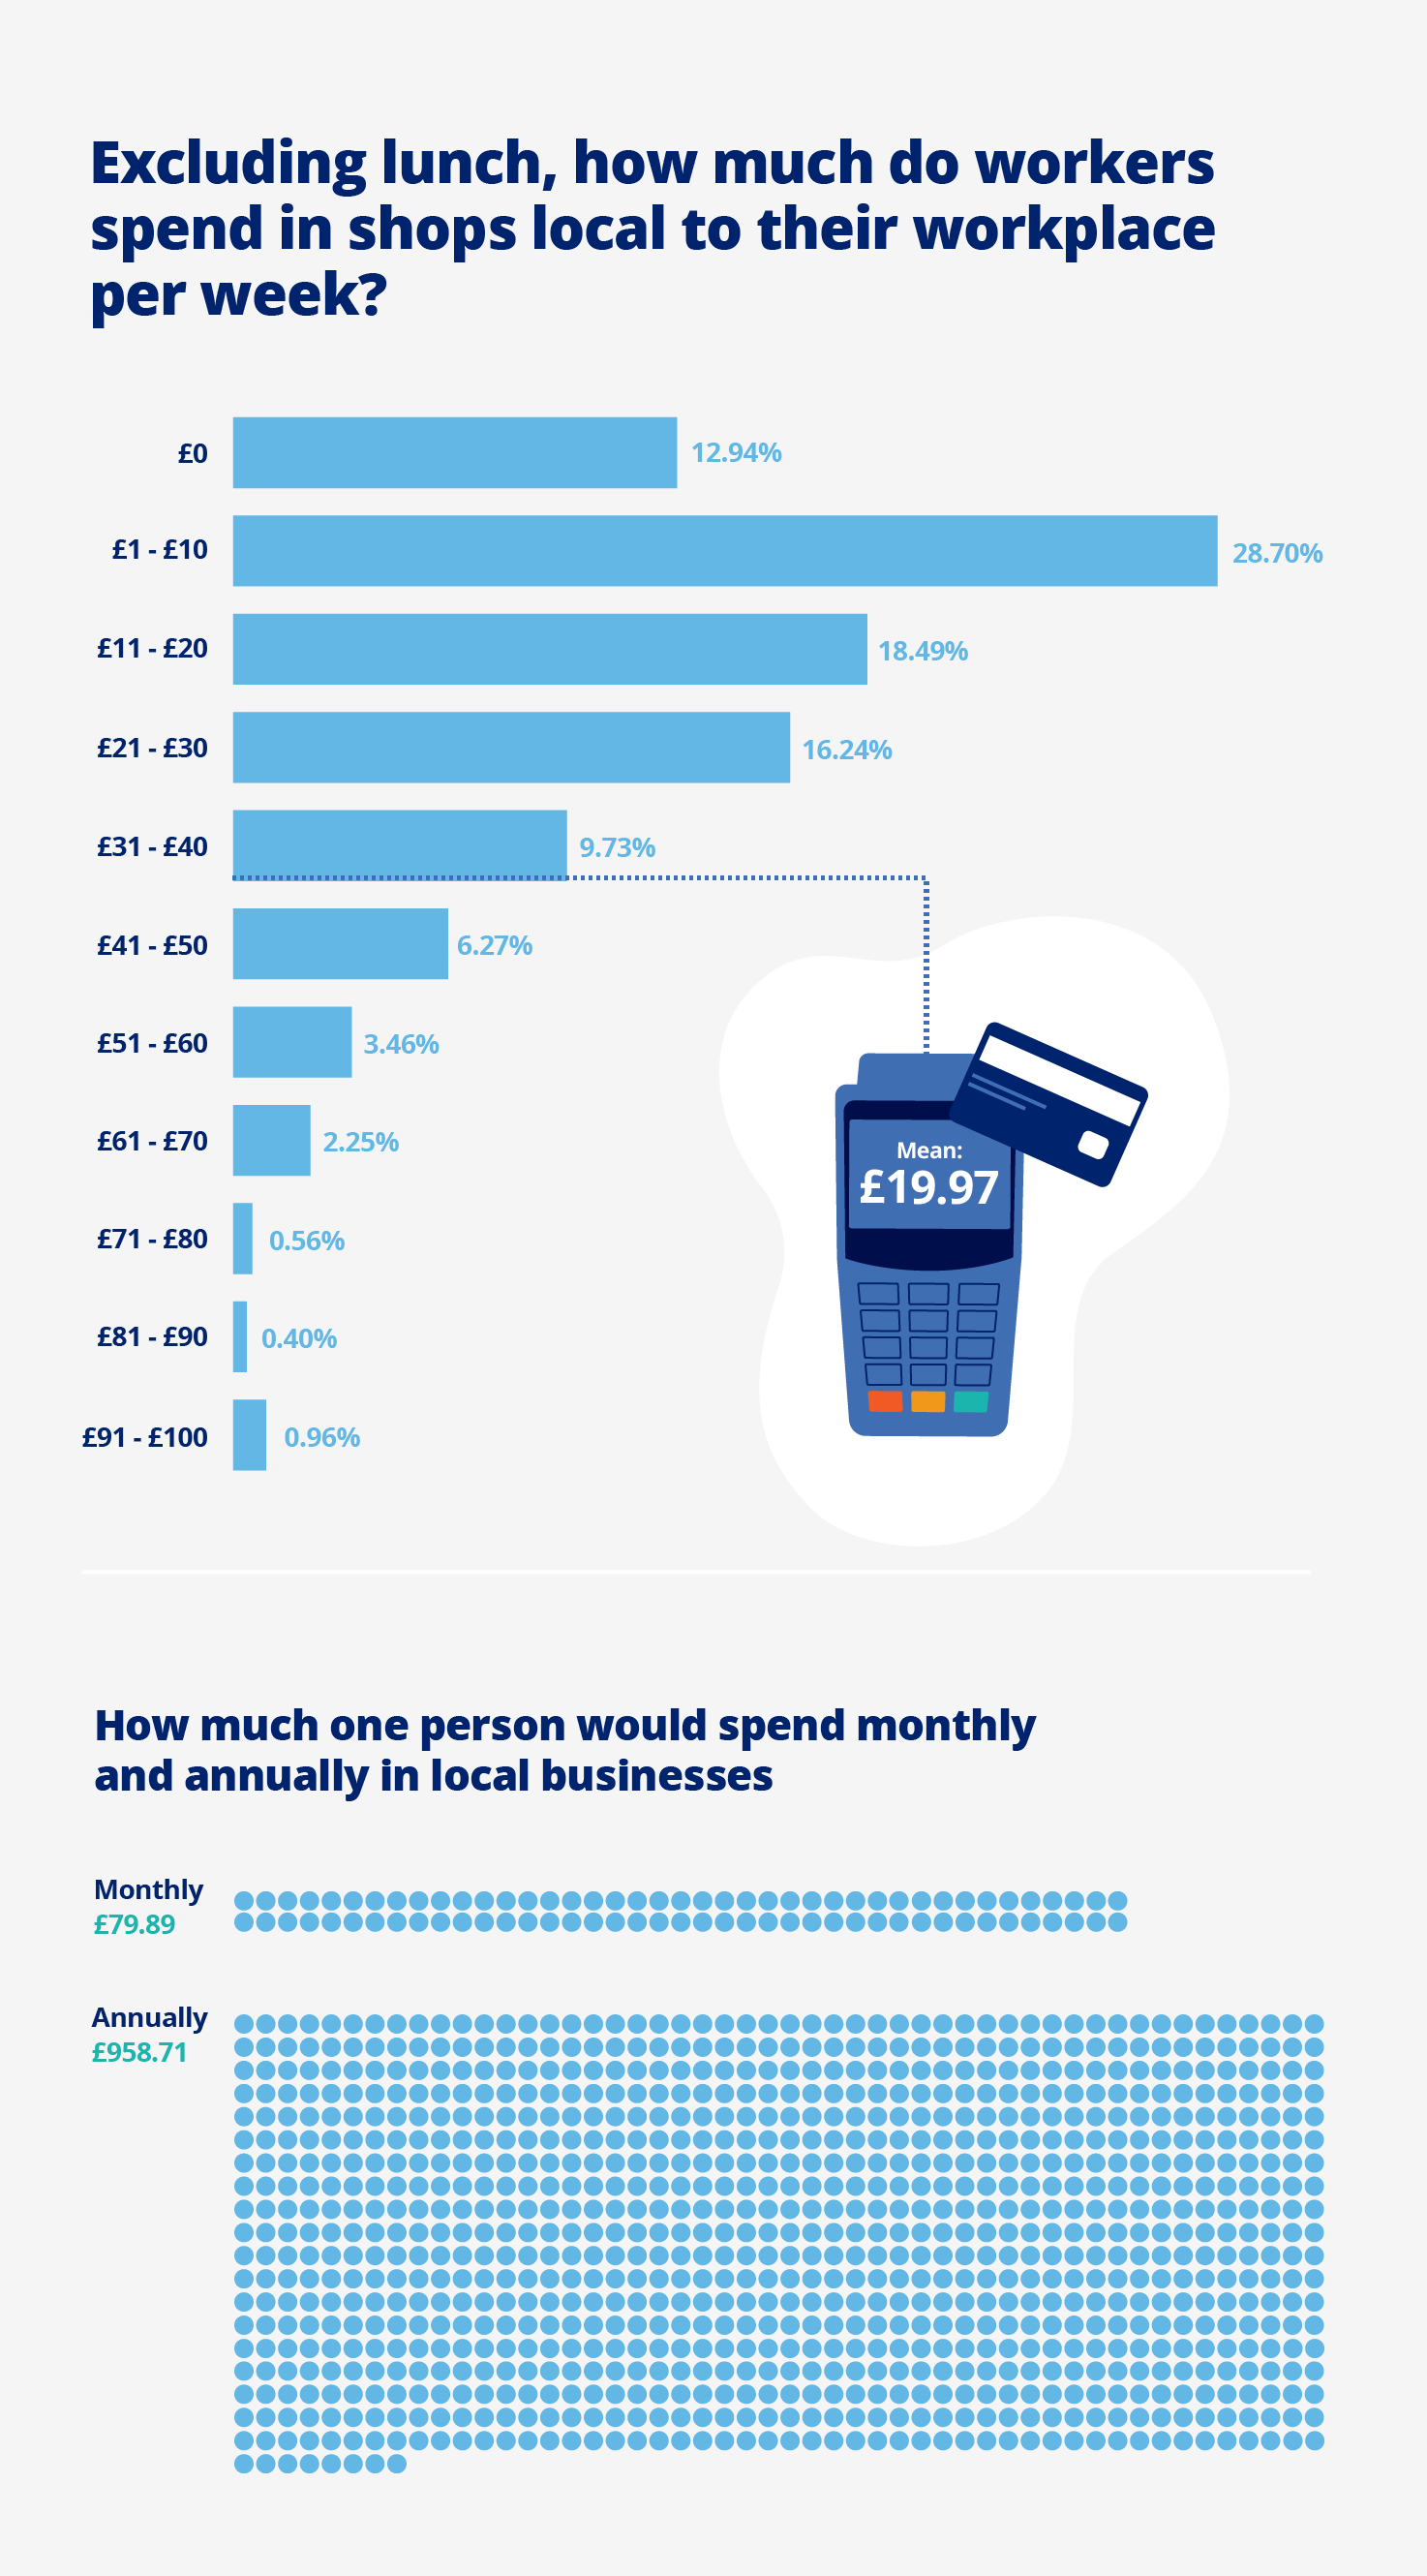 How much do workers spend in shops local to their place of work